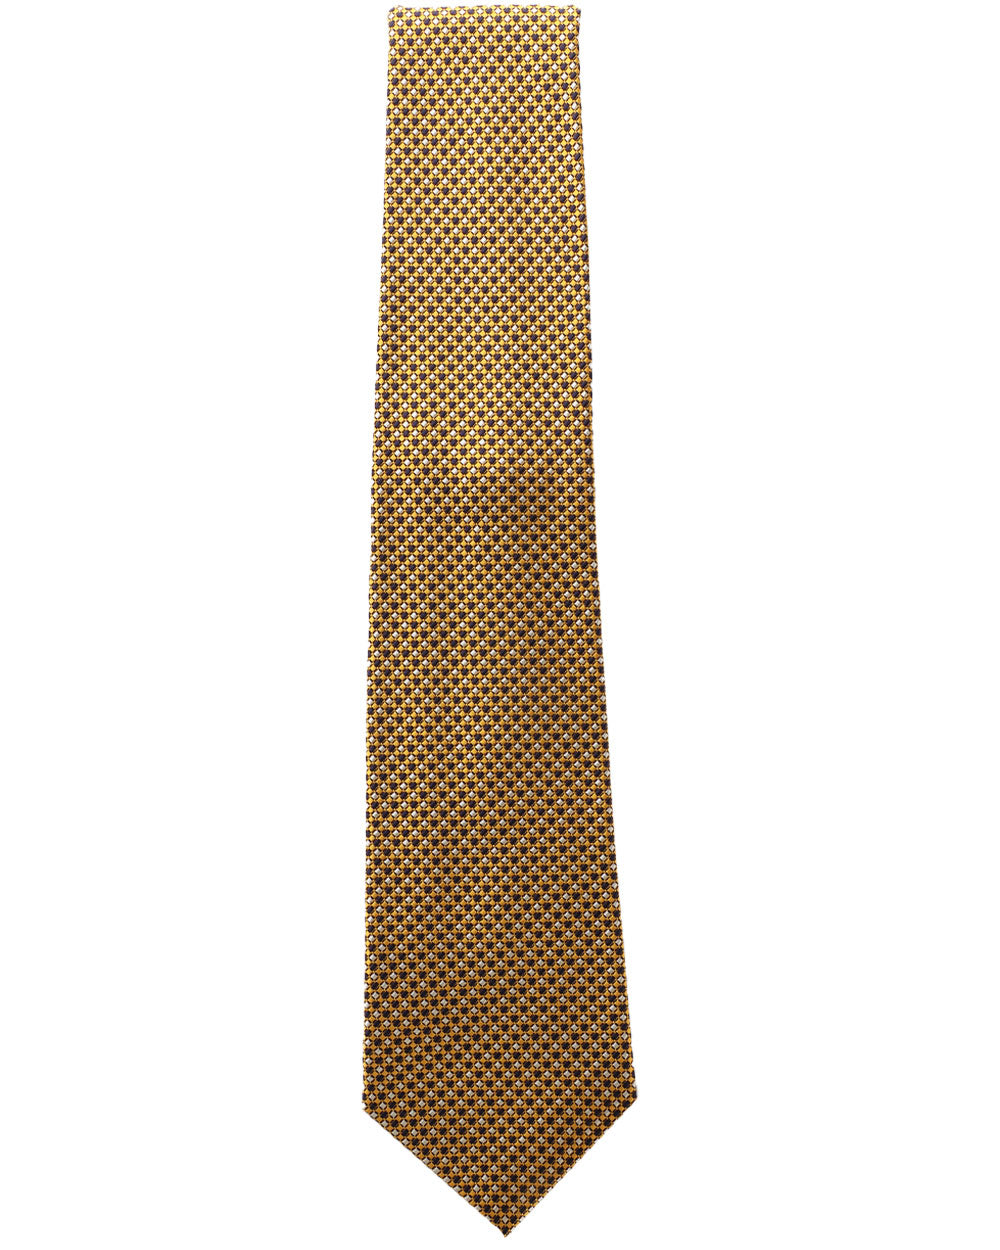 Gold and Navy Checked Woven Silk Tie